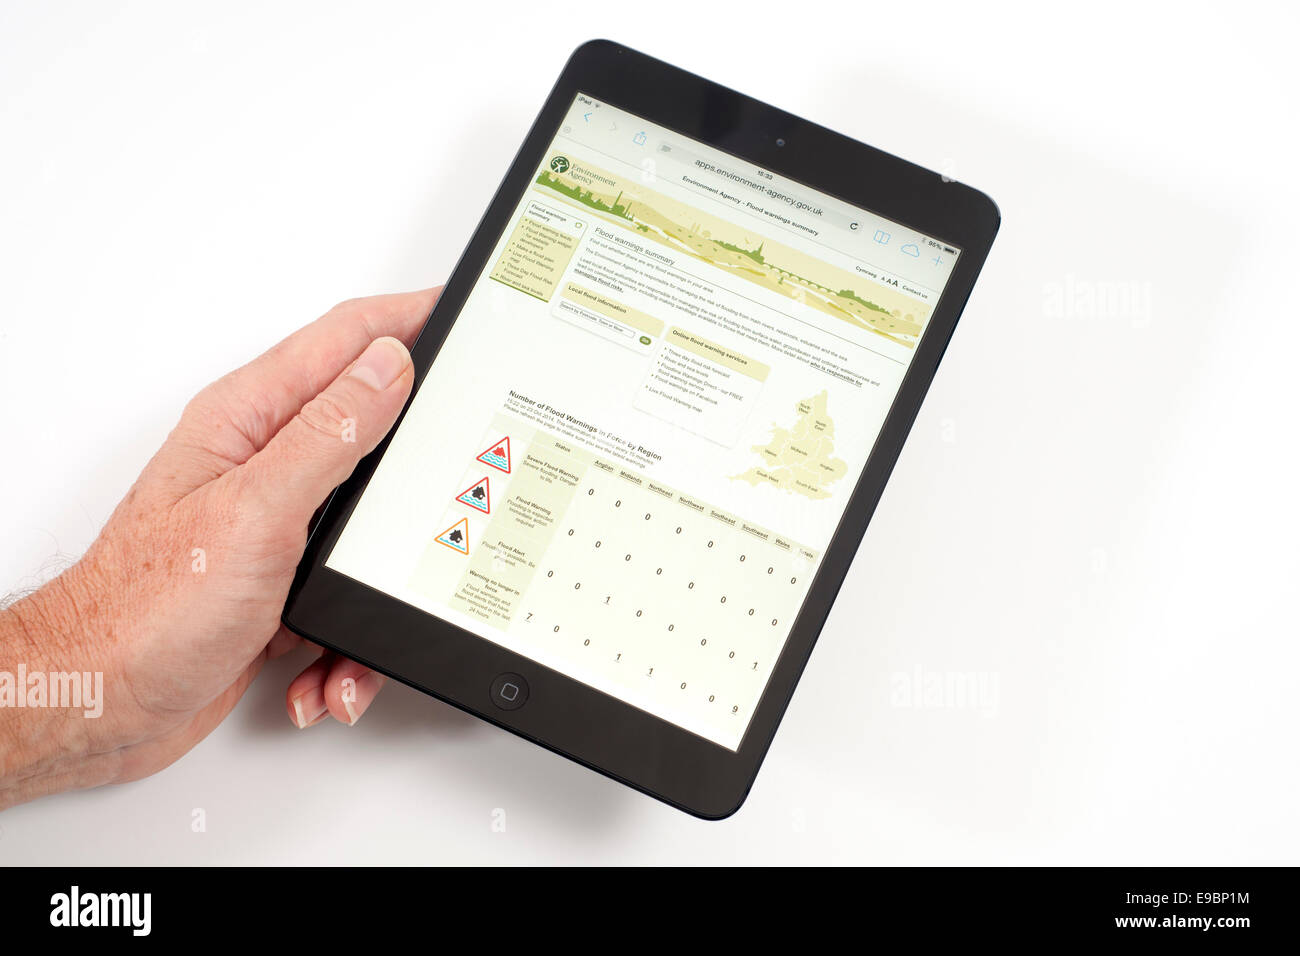 iPad with environment agency flooding app on screen checking for flood alerts Stock Photo